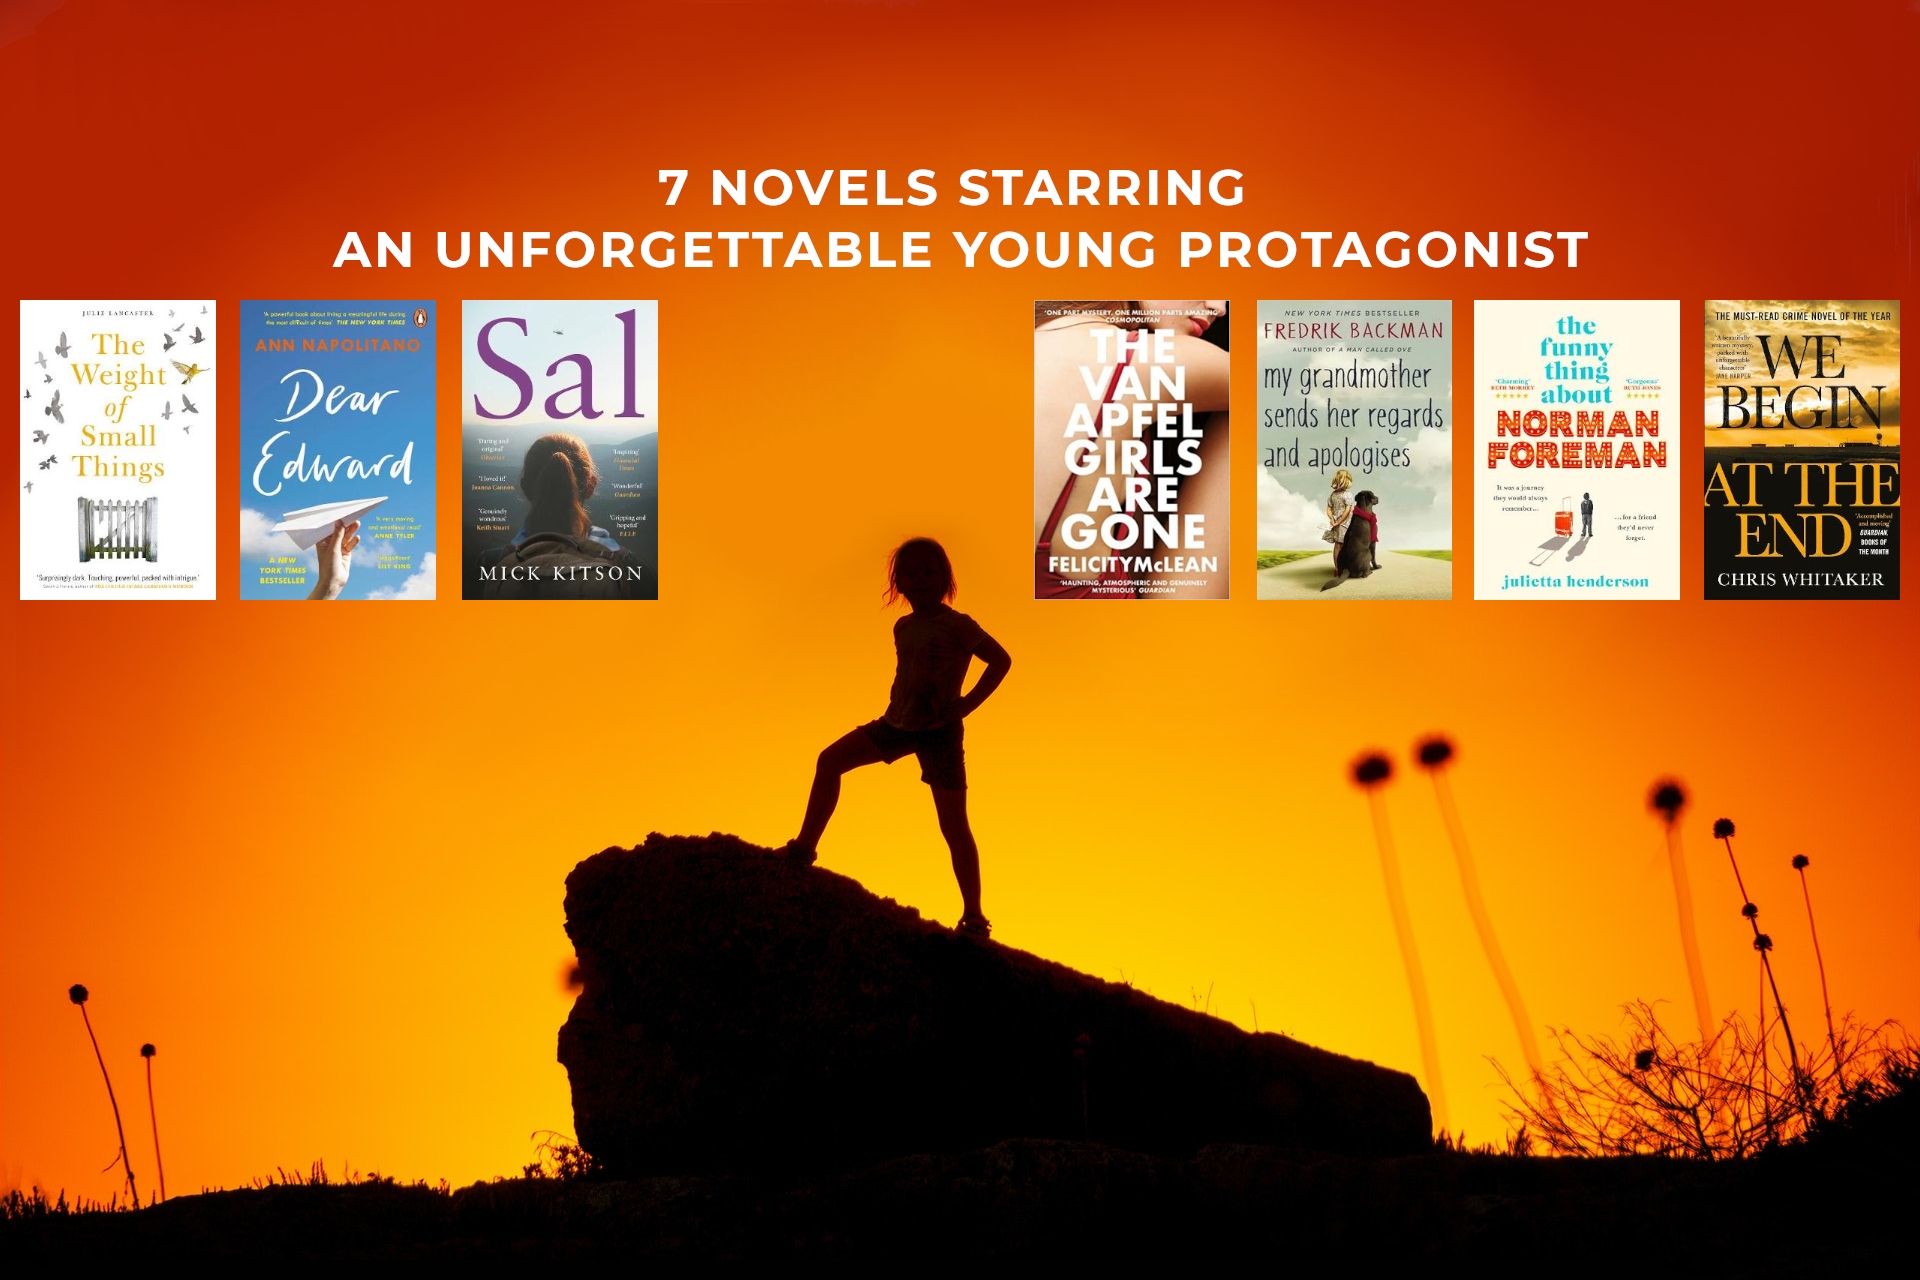 7 Novels Starring an Unforgettable Young Protagonist.